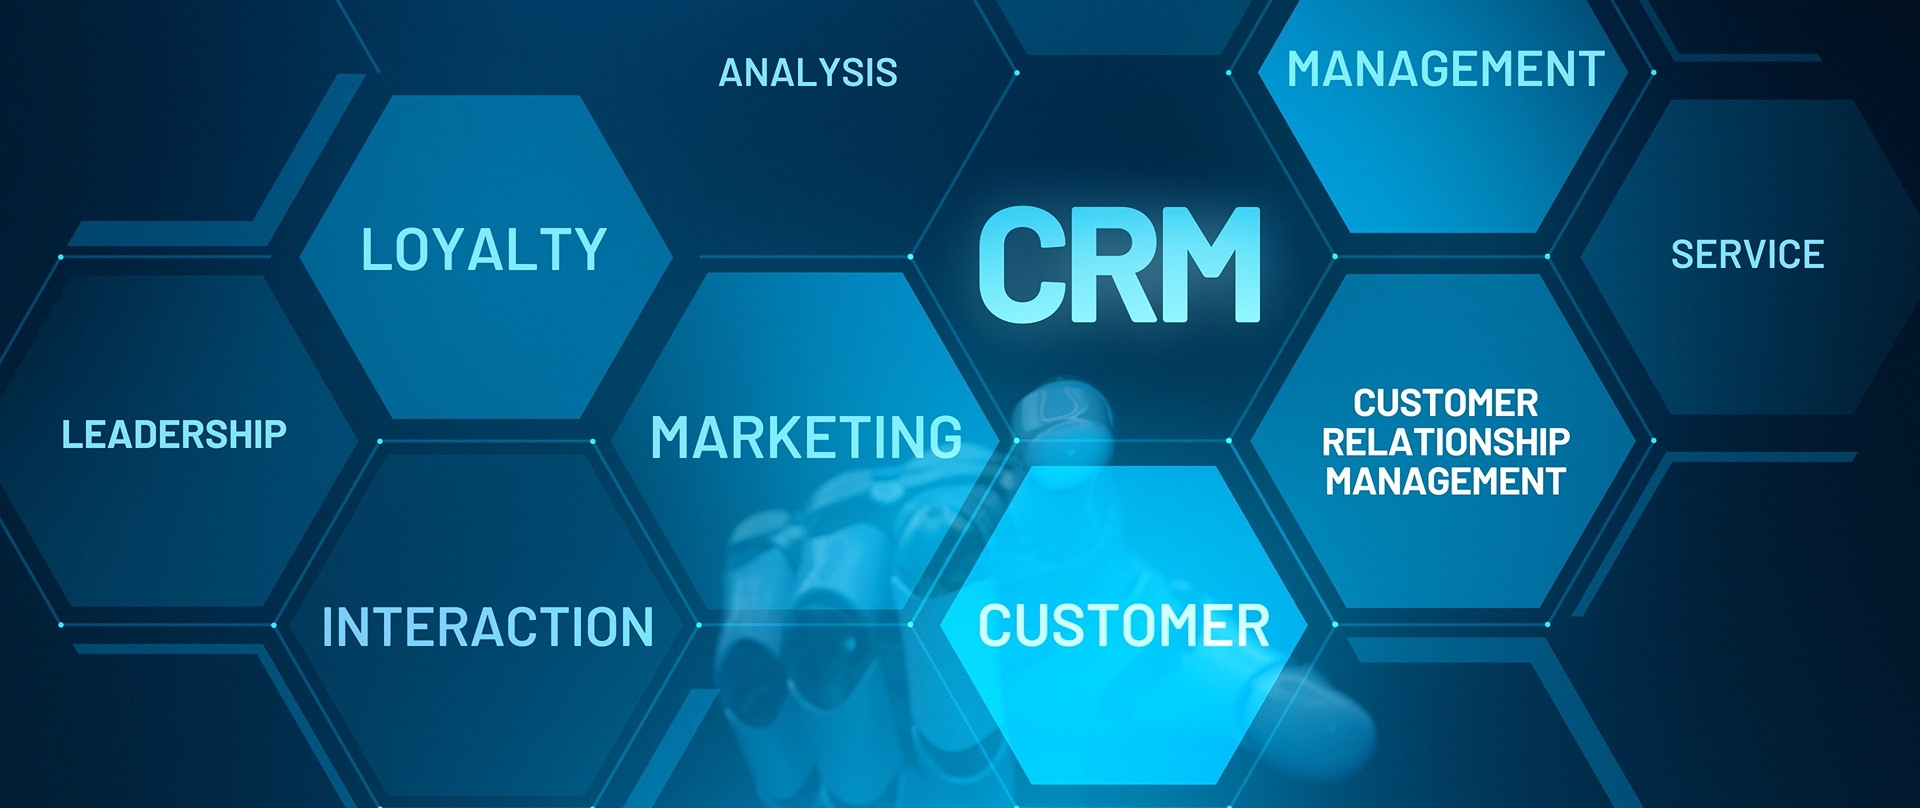 RevalCRM Features - Customer Relationship Management 